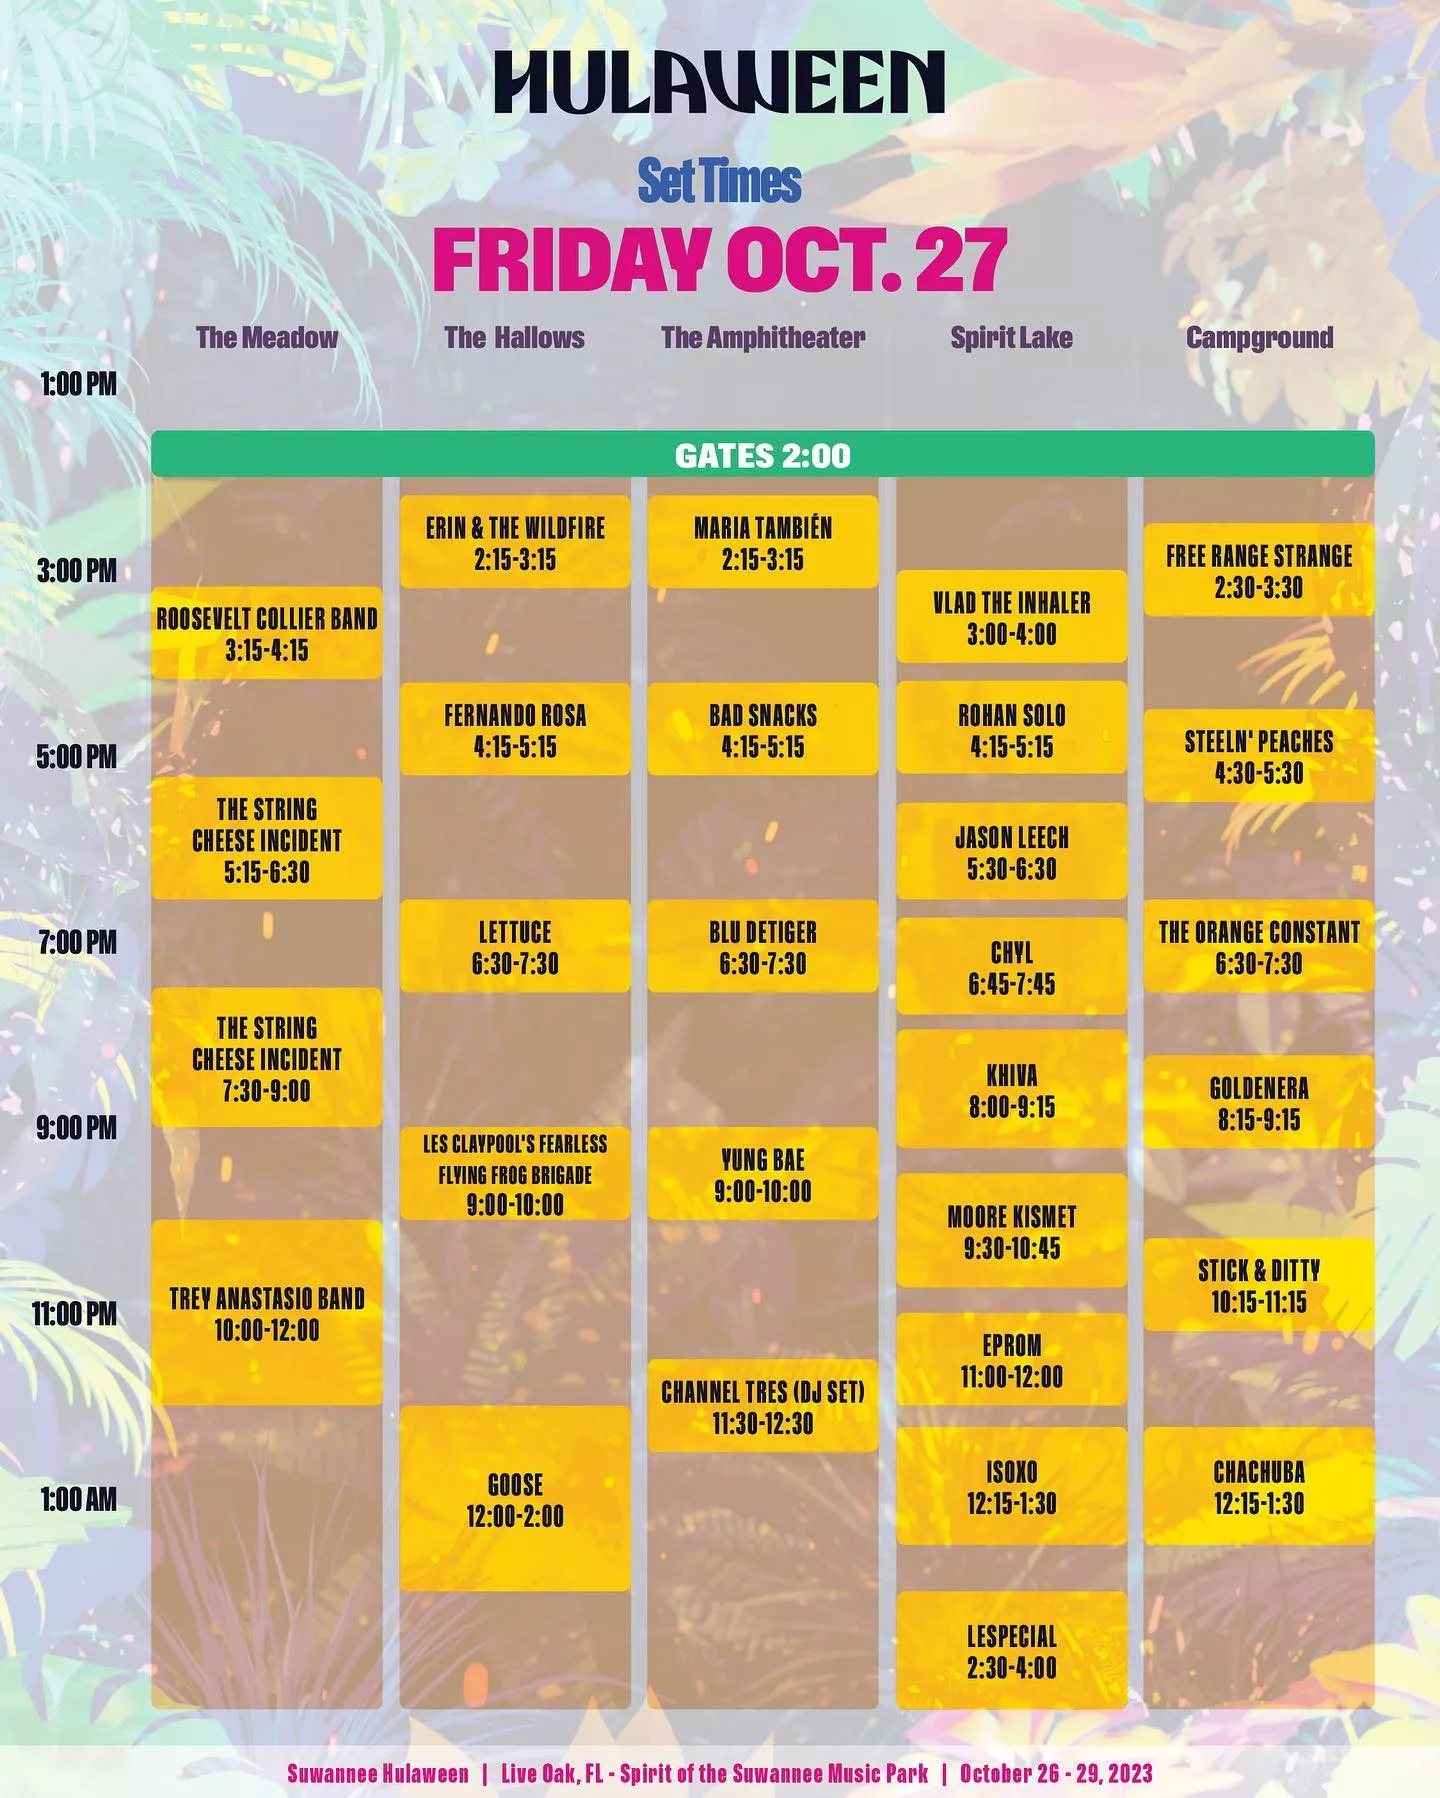 Hulaween Unveils 2023 Daily Lineup Schedule For 10th Anniversary